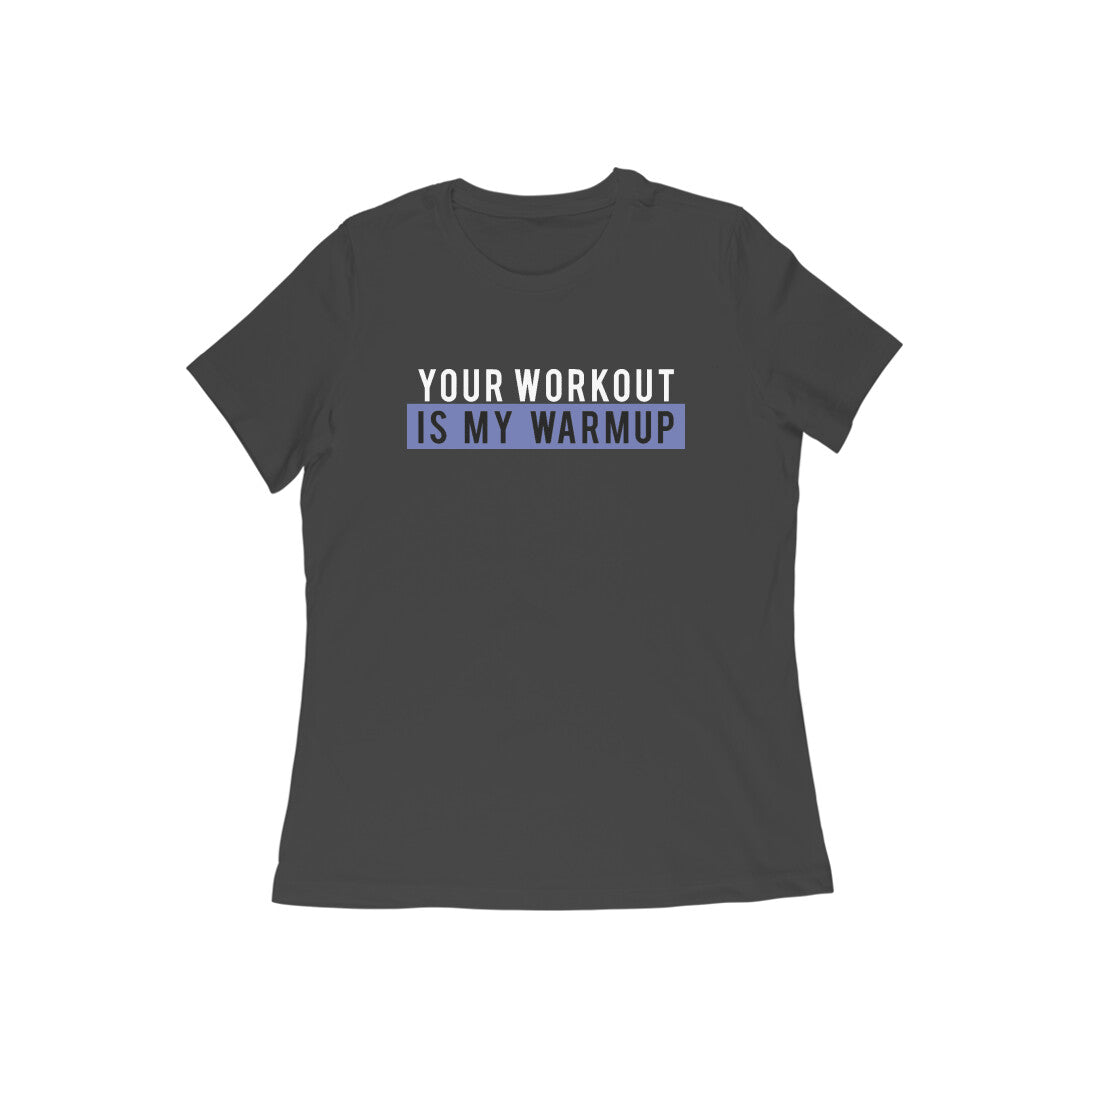 Your workout is my WARMUP